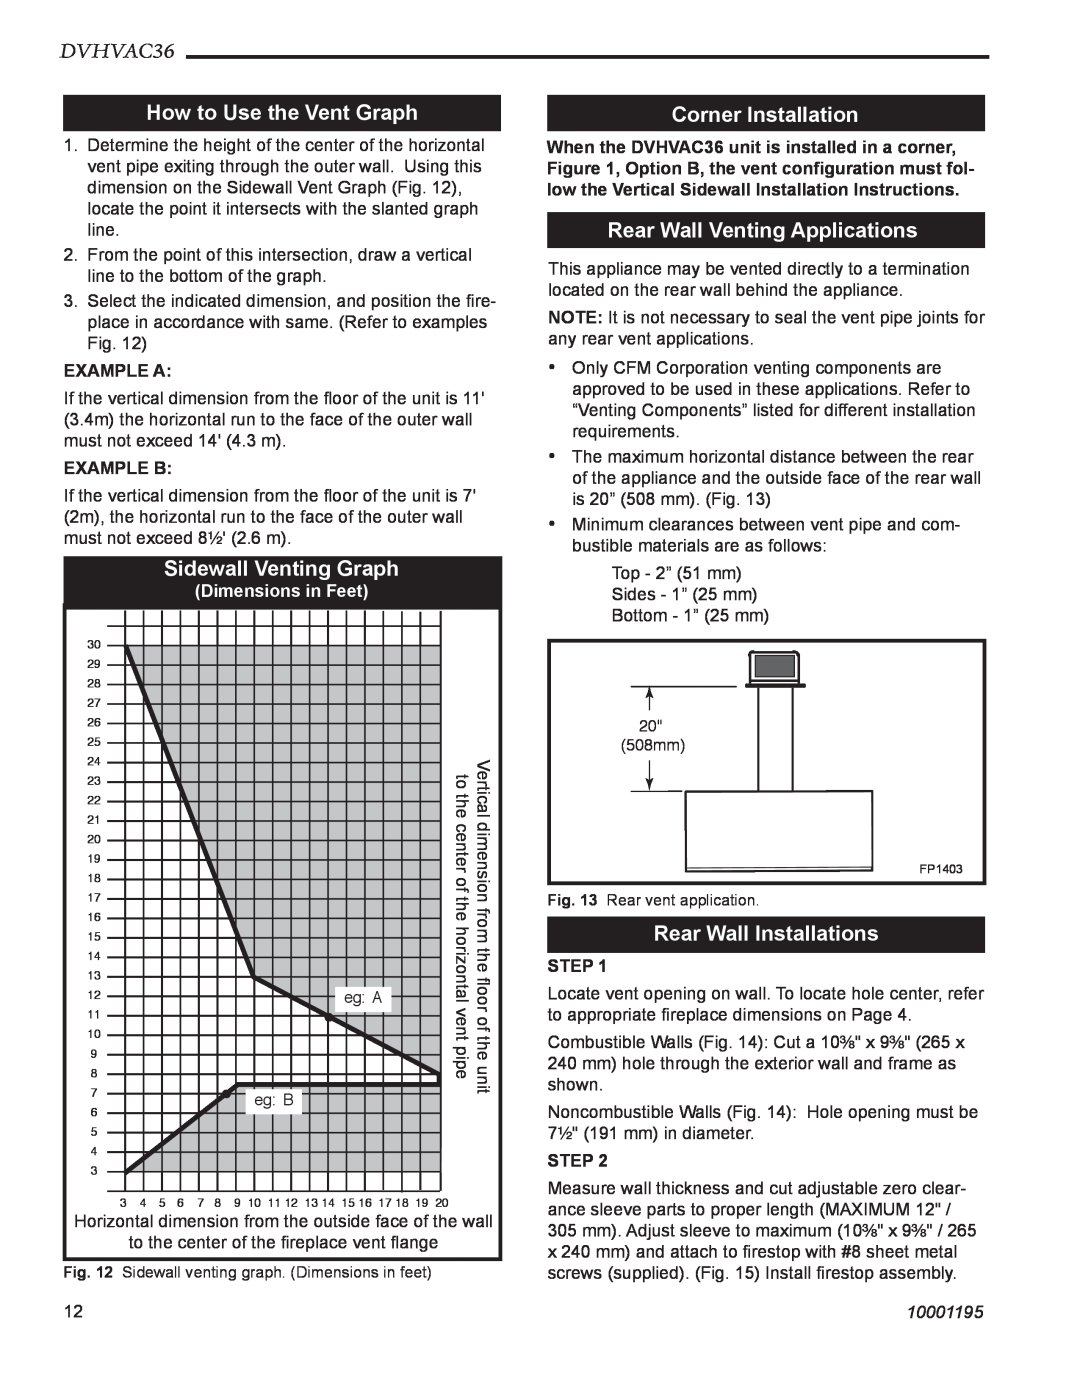 Vermont Casting DVHVAC36 How to Use the Vent Graph, Sidewall Venting Graph, Corner Installation, Rear Wall Installations 